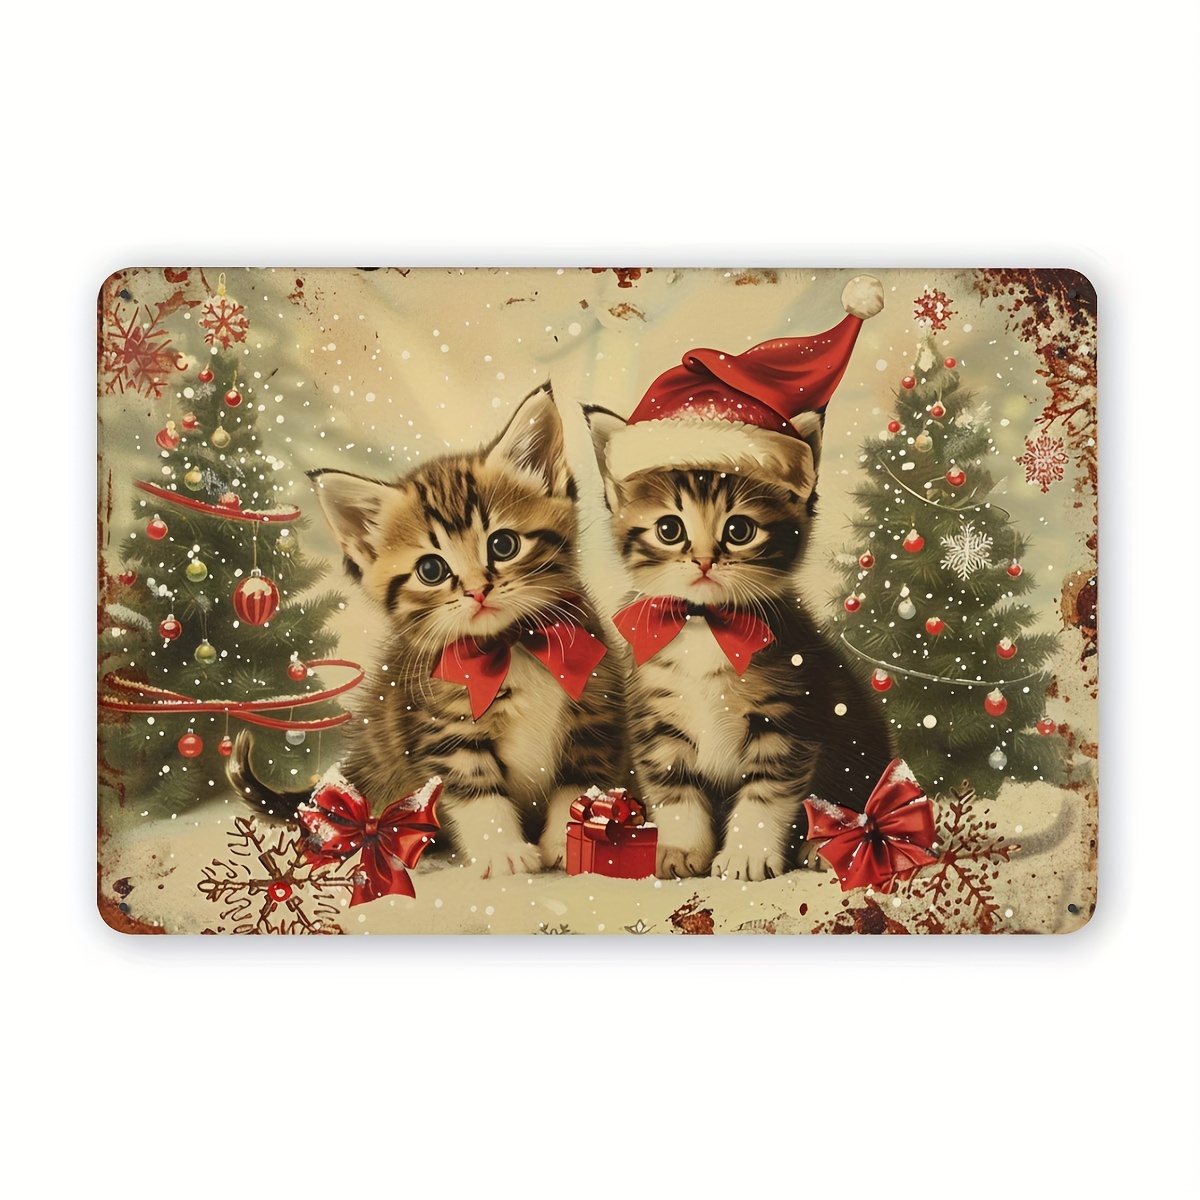 

Vintage Christmas Kittens Metal Sign: Festive Art Design, Perfect For Home Decor, Pet Shops, Cafes, Offices, Bookstores, Gift Shops, Schools, Hotel Lobbies, Malls - 12x8 Inches